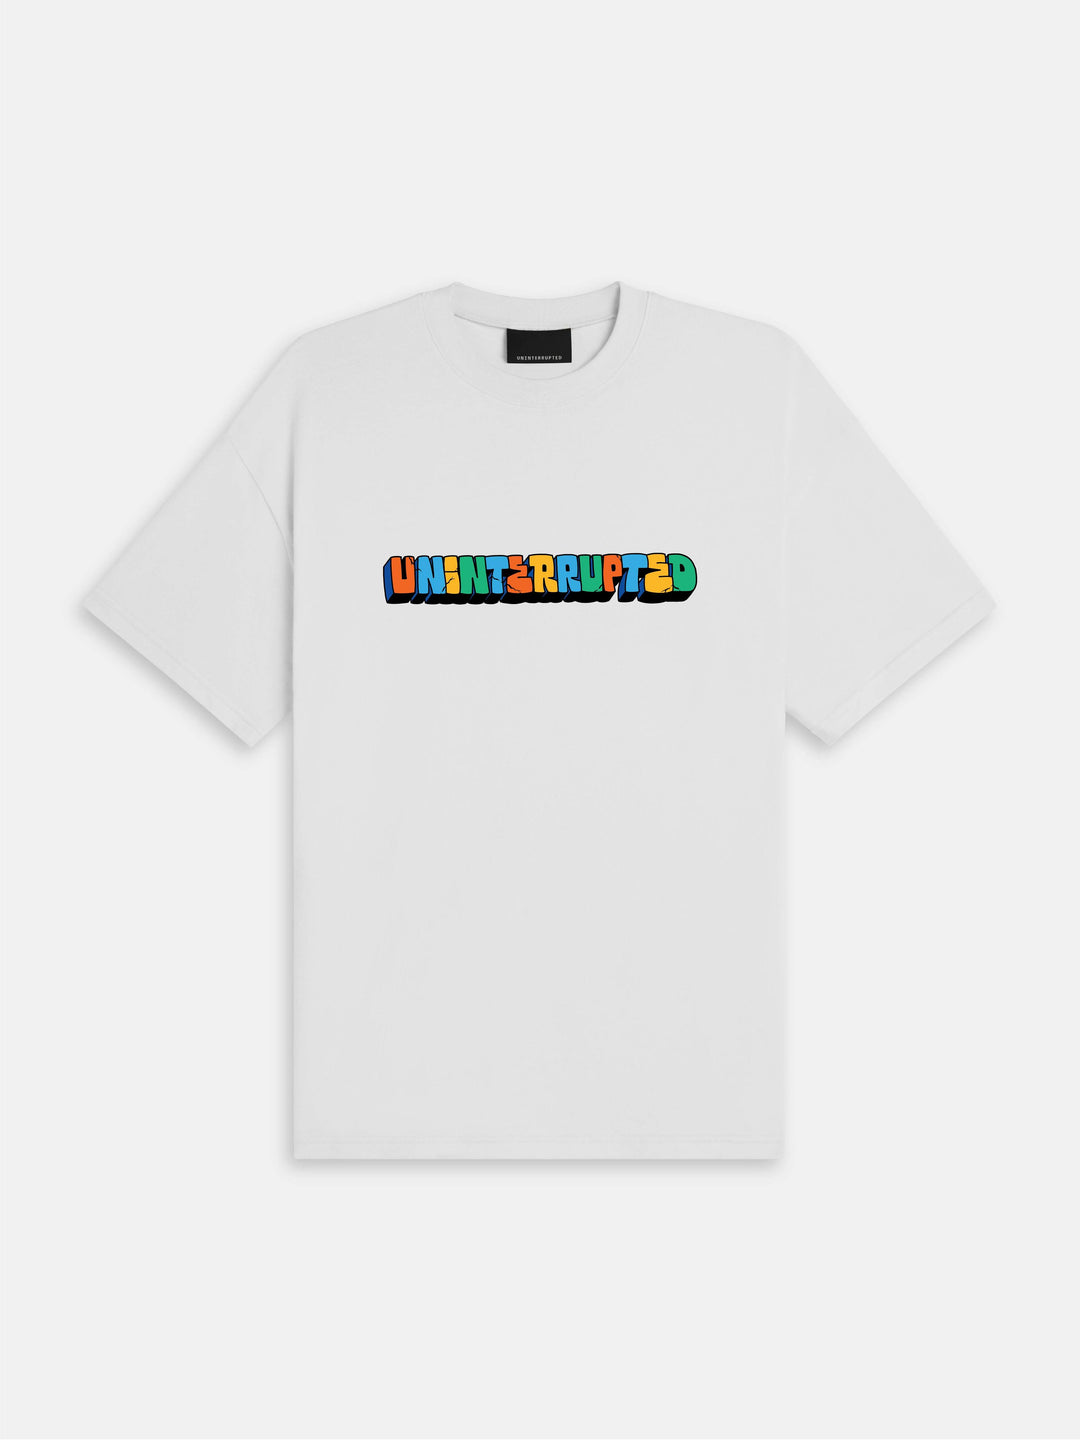 White short sleeve tshirt with multicolor crooked font that spells out UNINTERRUPTED